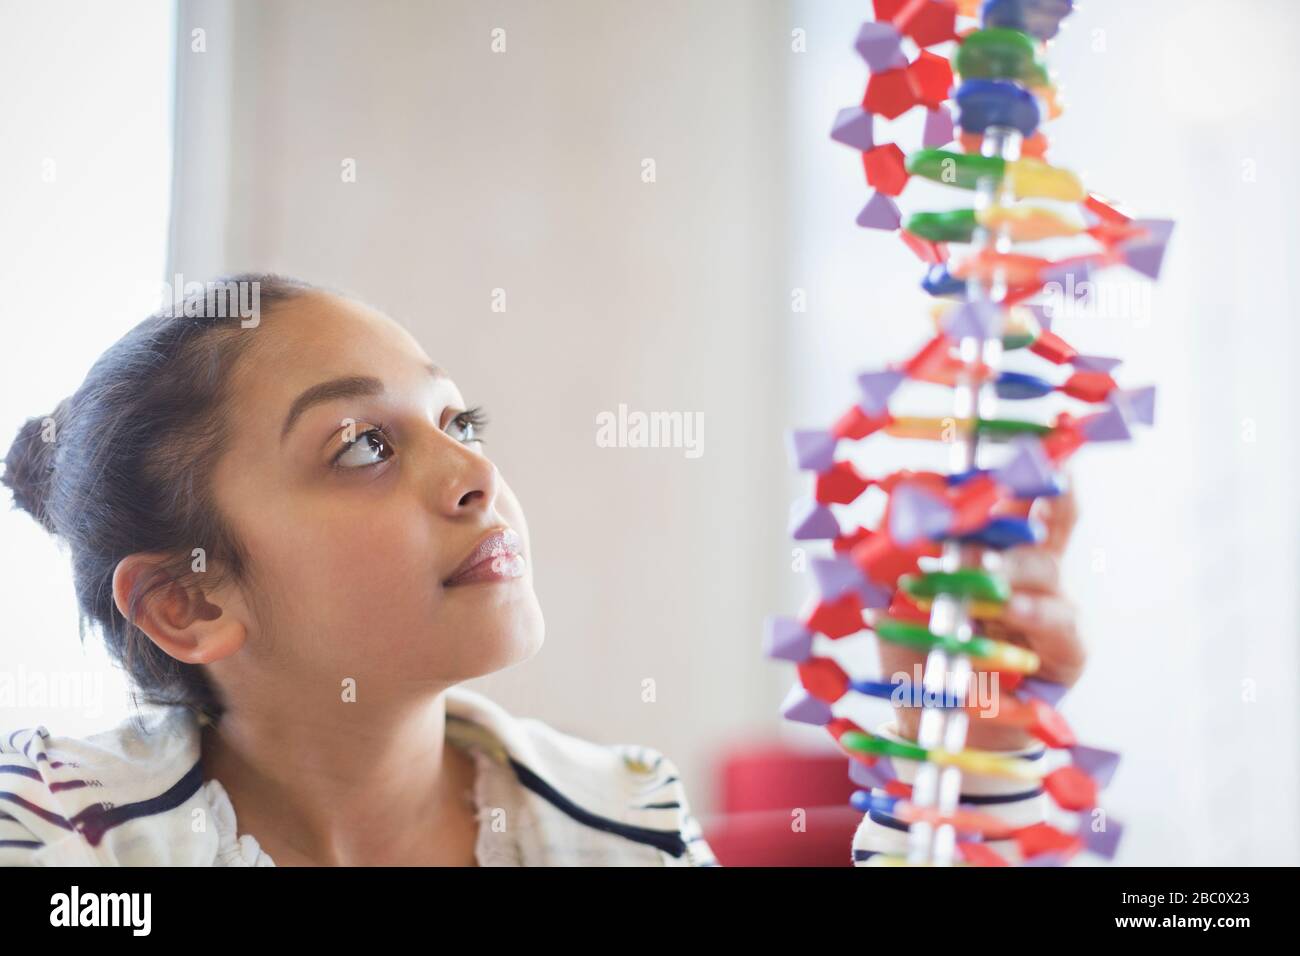 Curious girl student examining DNA model in classroom Stock Photo